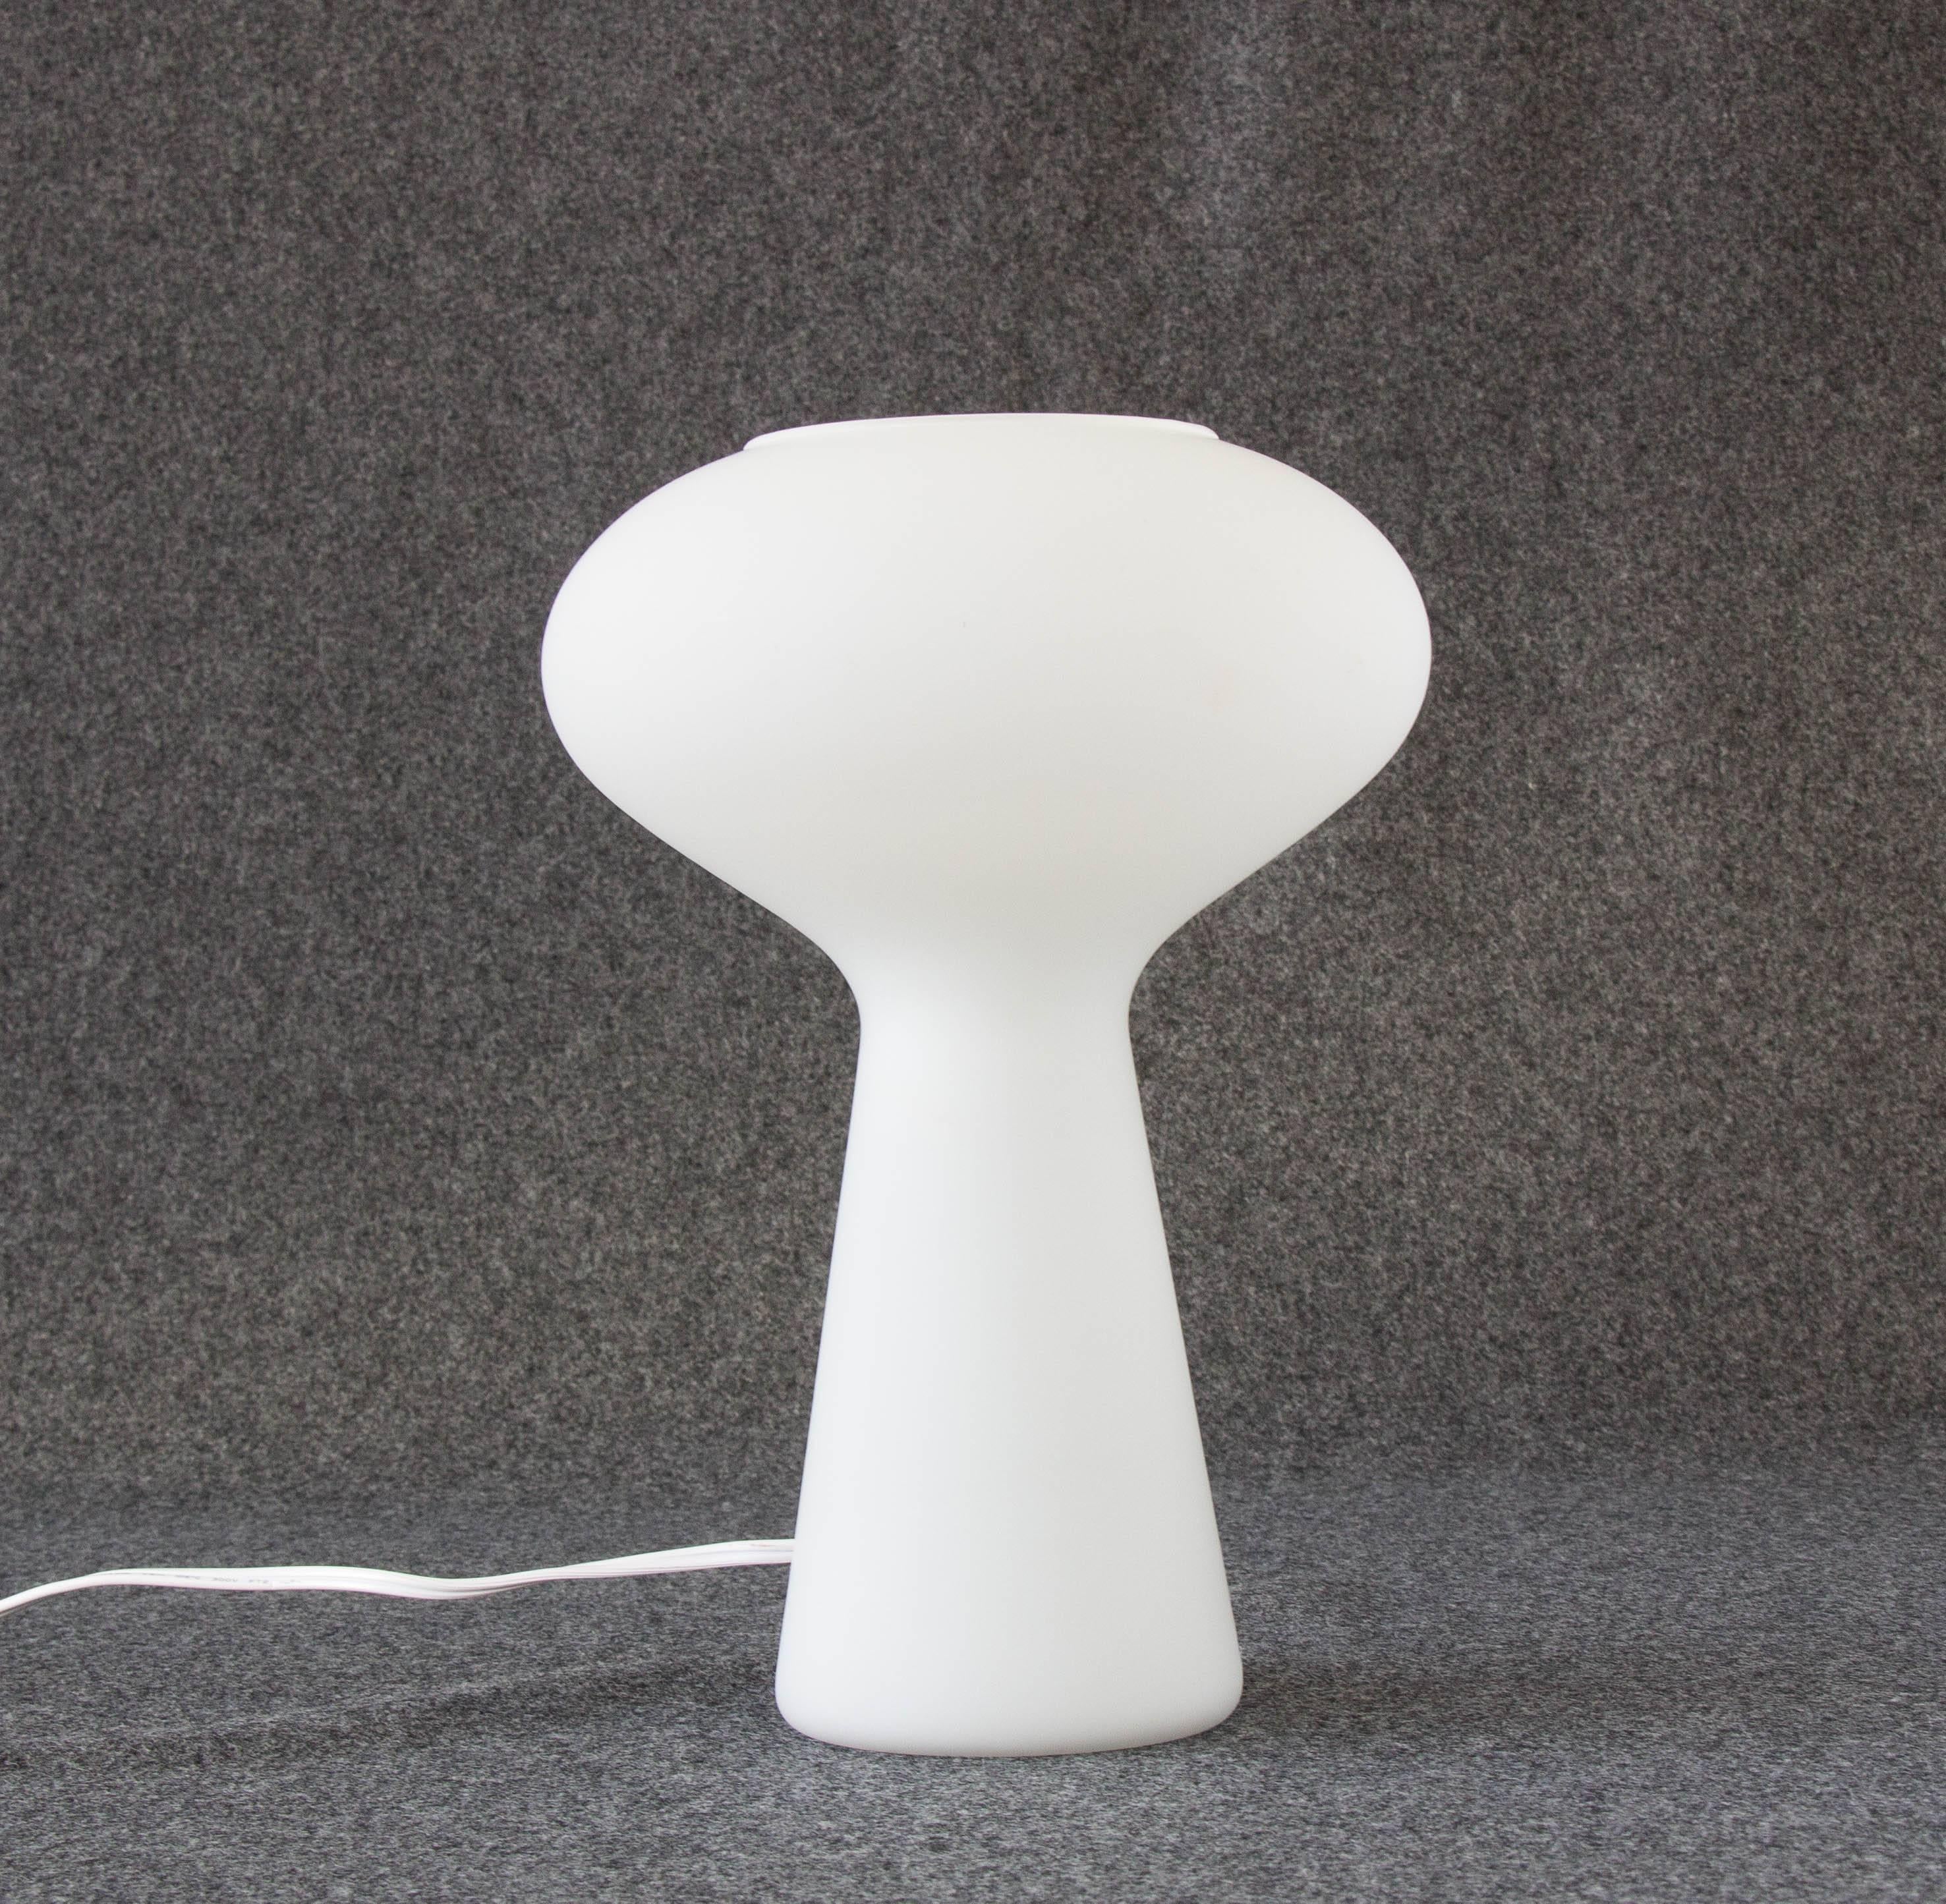 Frosted Blown Glass Mushroom Lamp by Lisa Johansson Pape